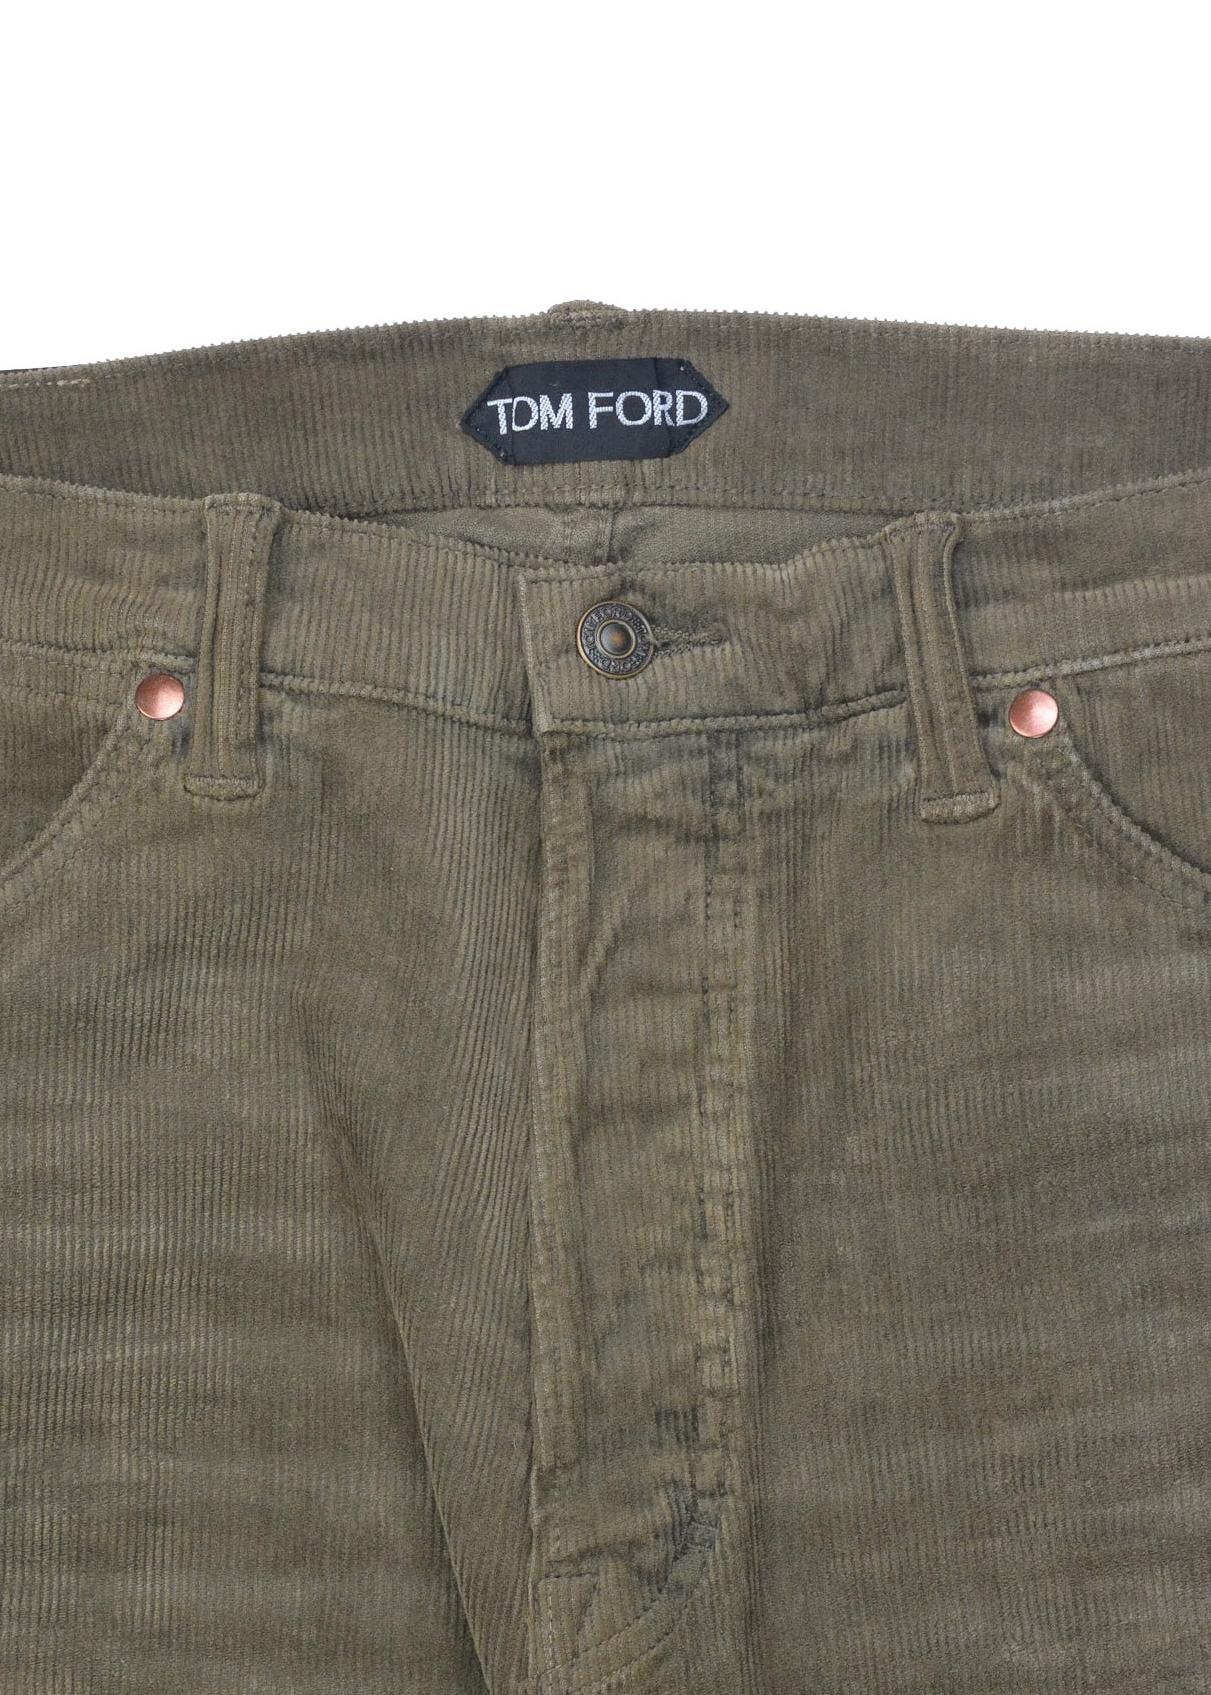 Gray Tom Ford Men's Dark Brown Corduroy Loose Fit Jeans For Sale